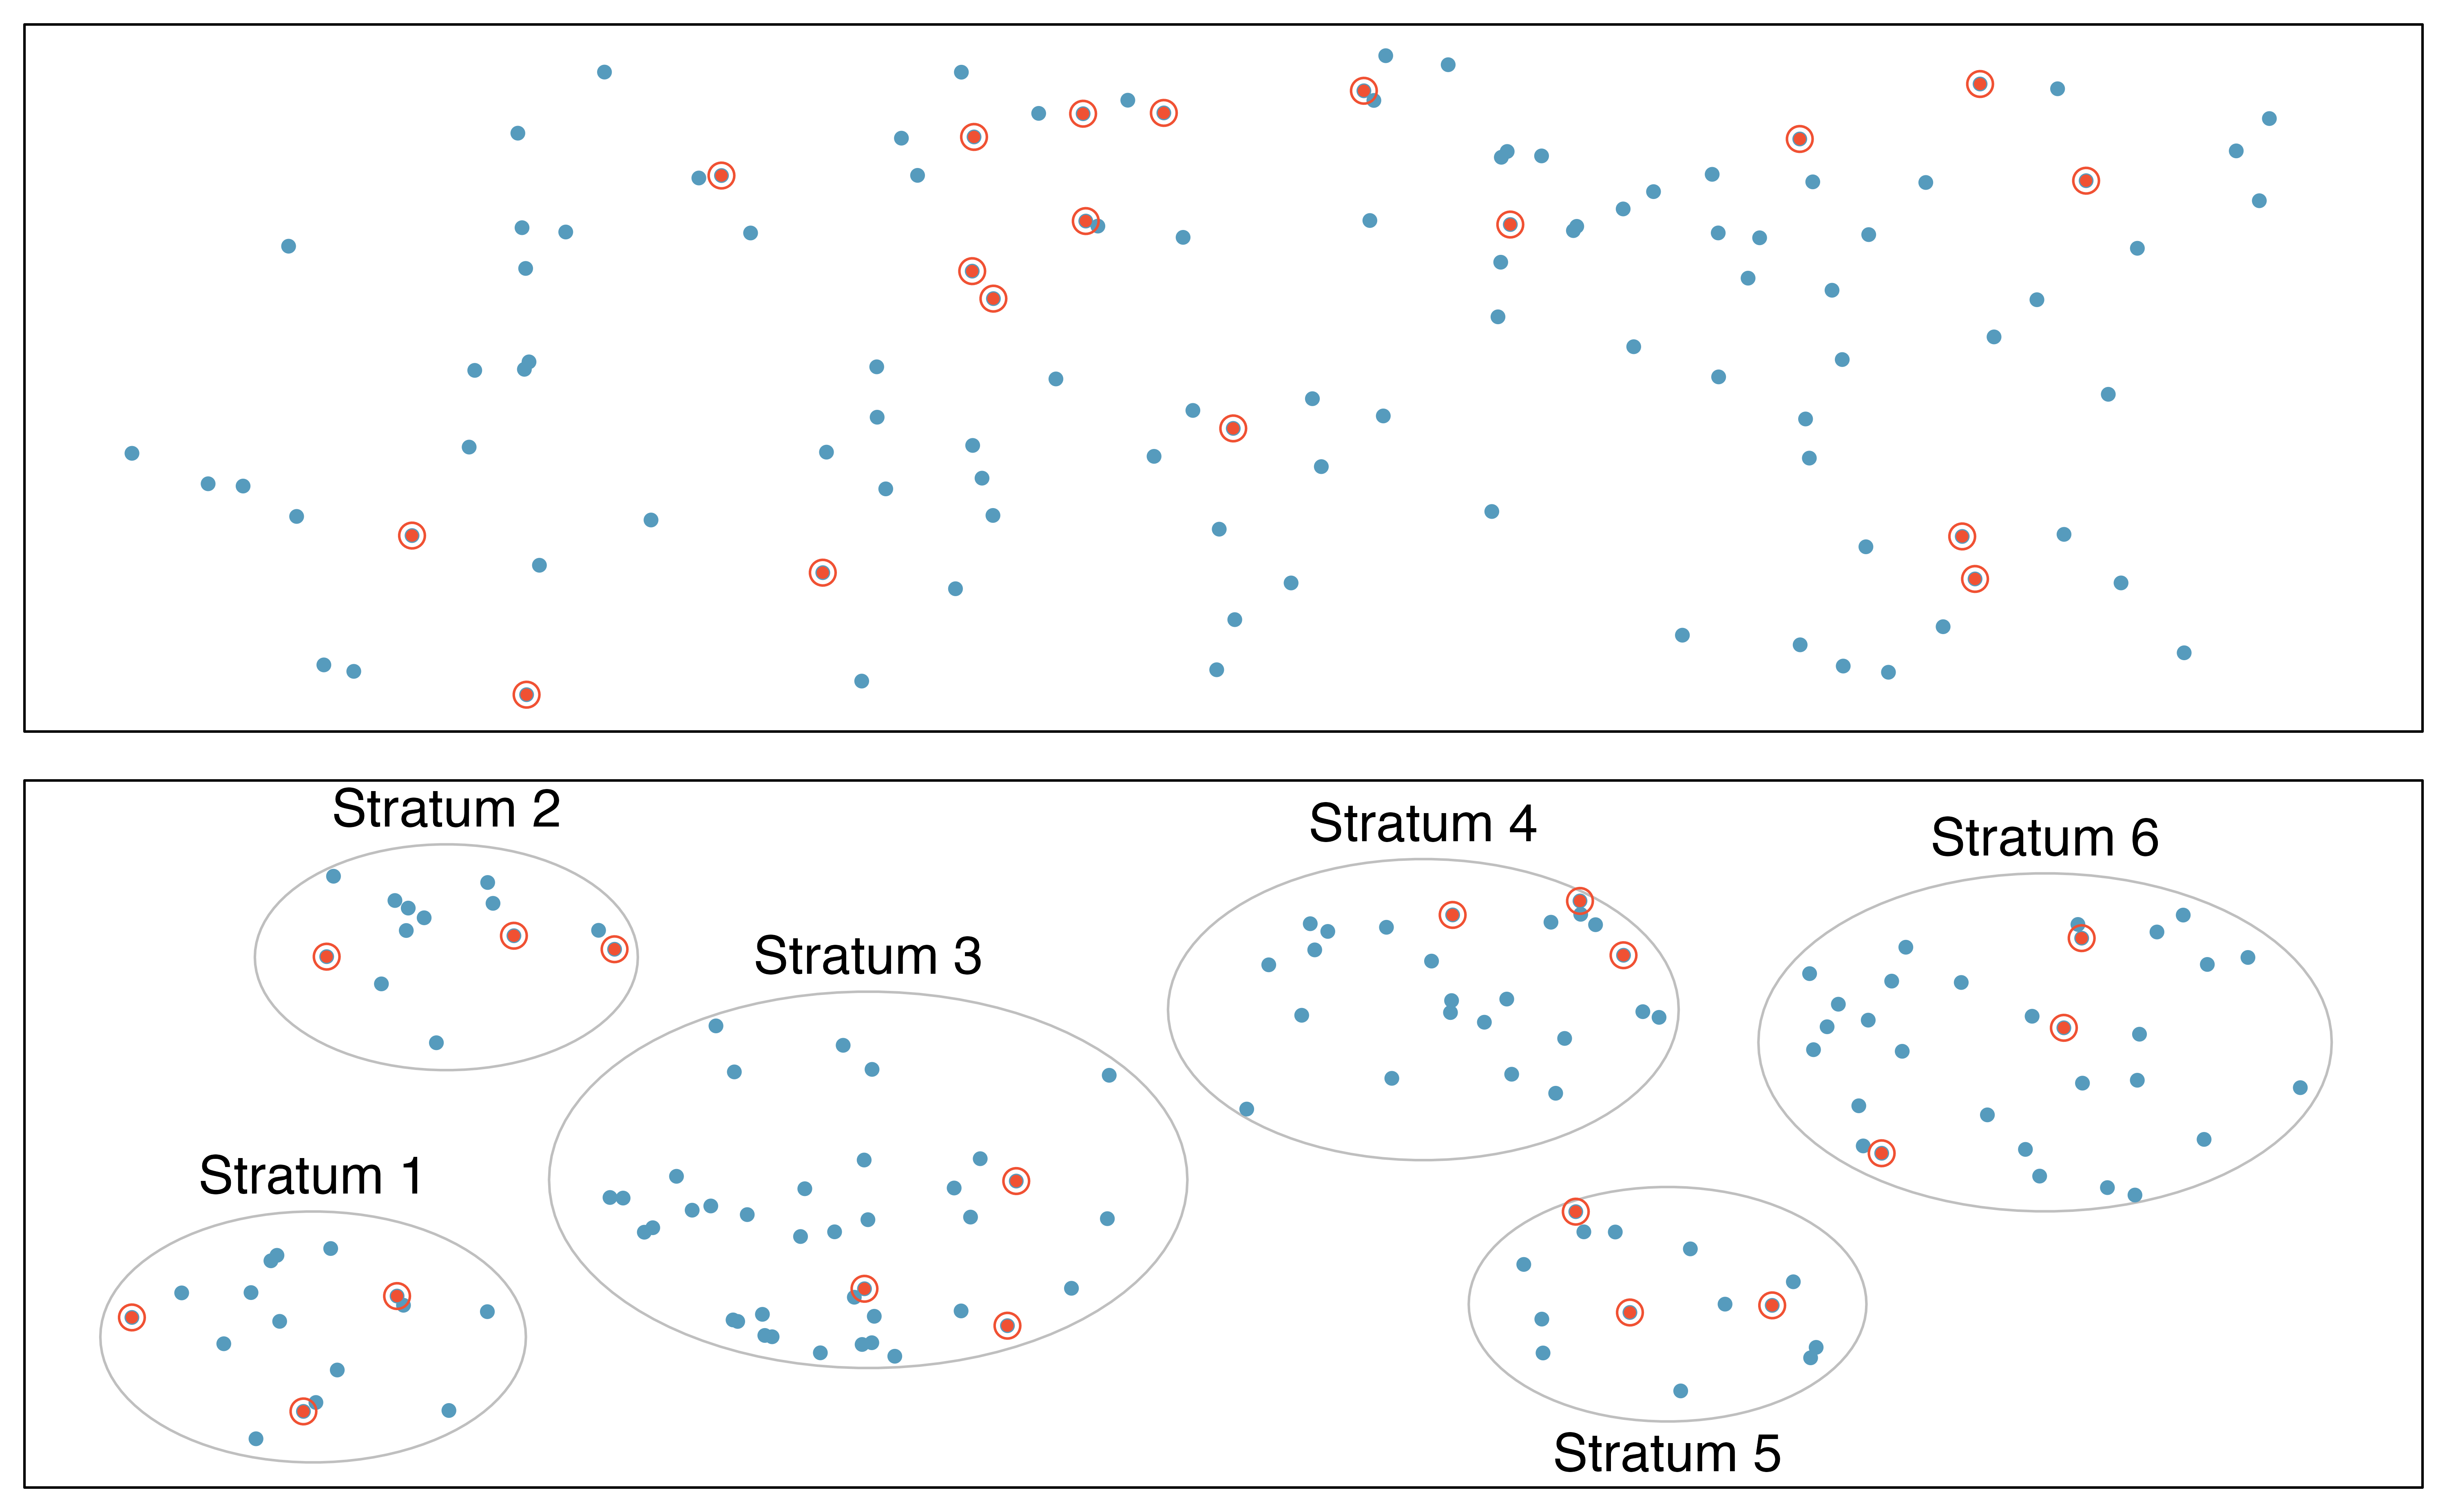 Examples of simple random and stratified sampling. In the top panel, simple random sampling was used to randomly select the 18 cases (denoted in red). In the bottom panel, stratified sampling was used: cases were grouped into strata, then simple random sampling was employed to randomly select 3 cases within each stratum.